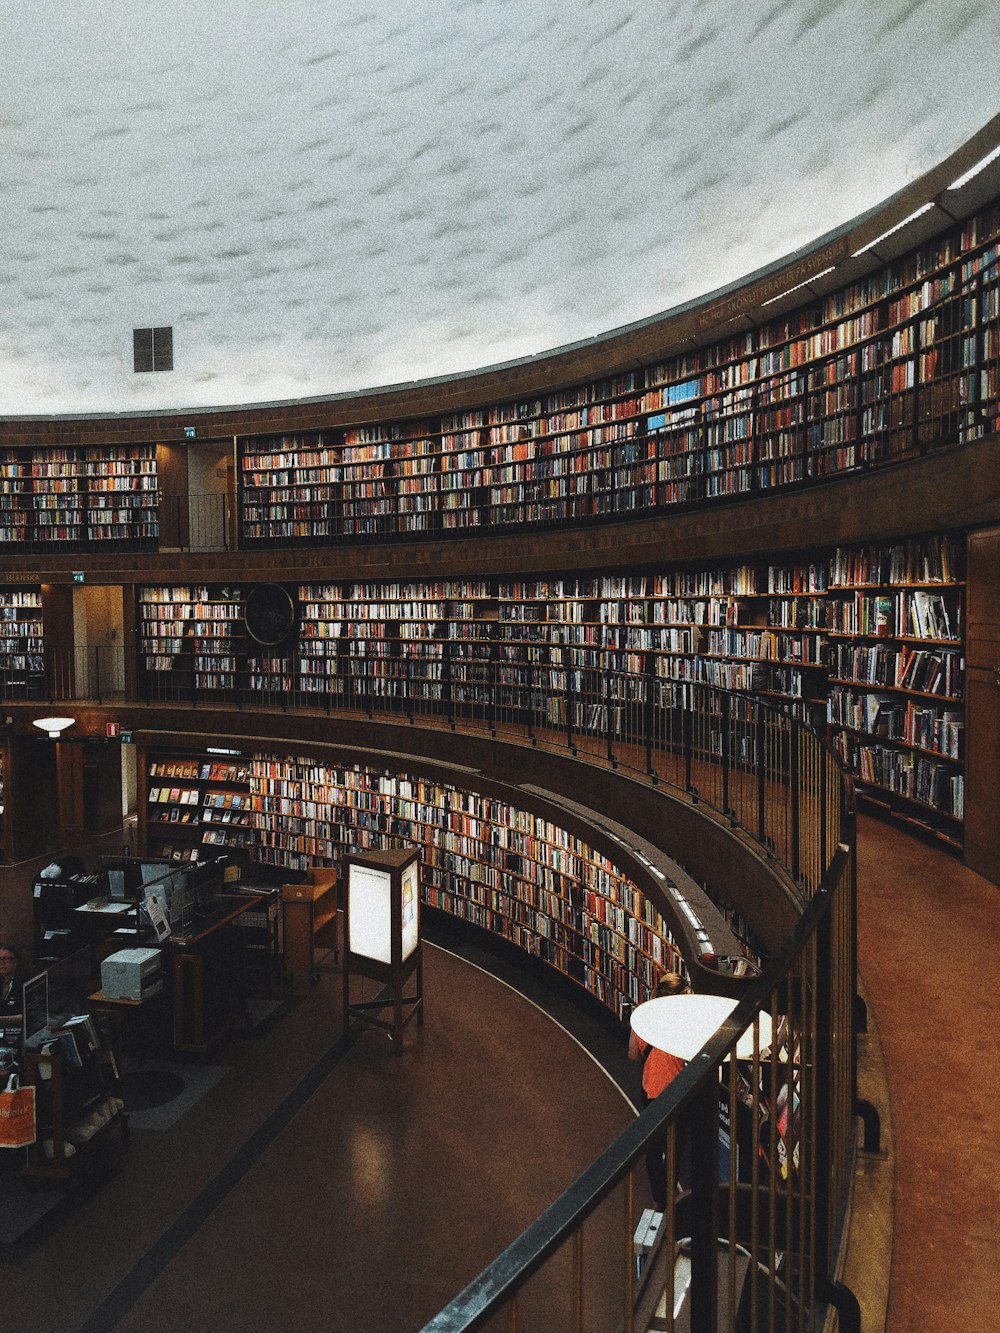 a library filled with lots of books under a cloudy sky